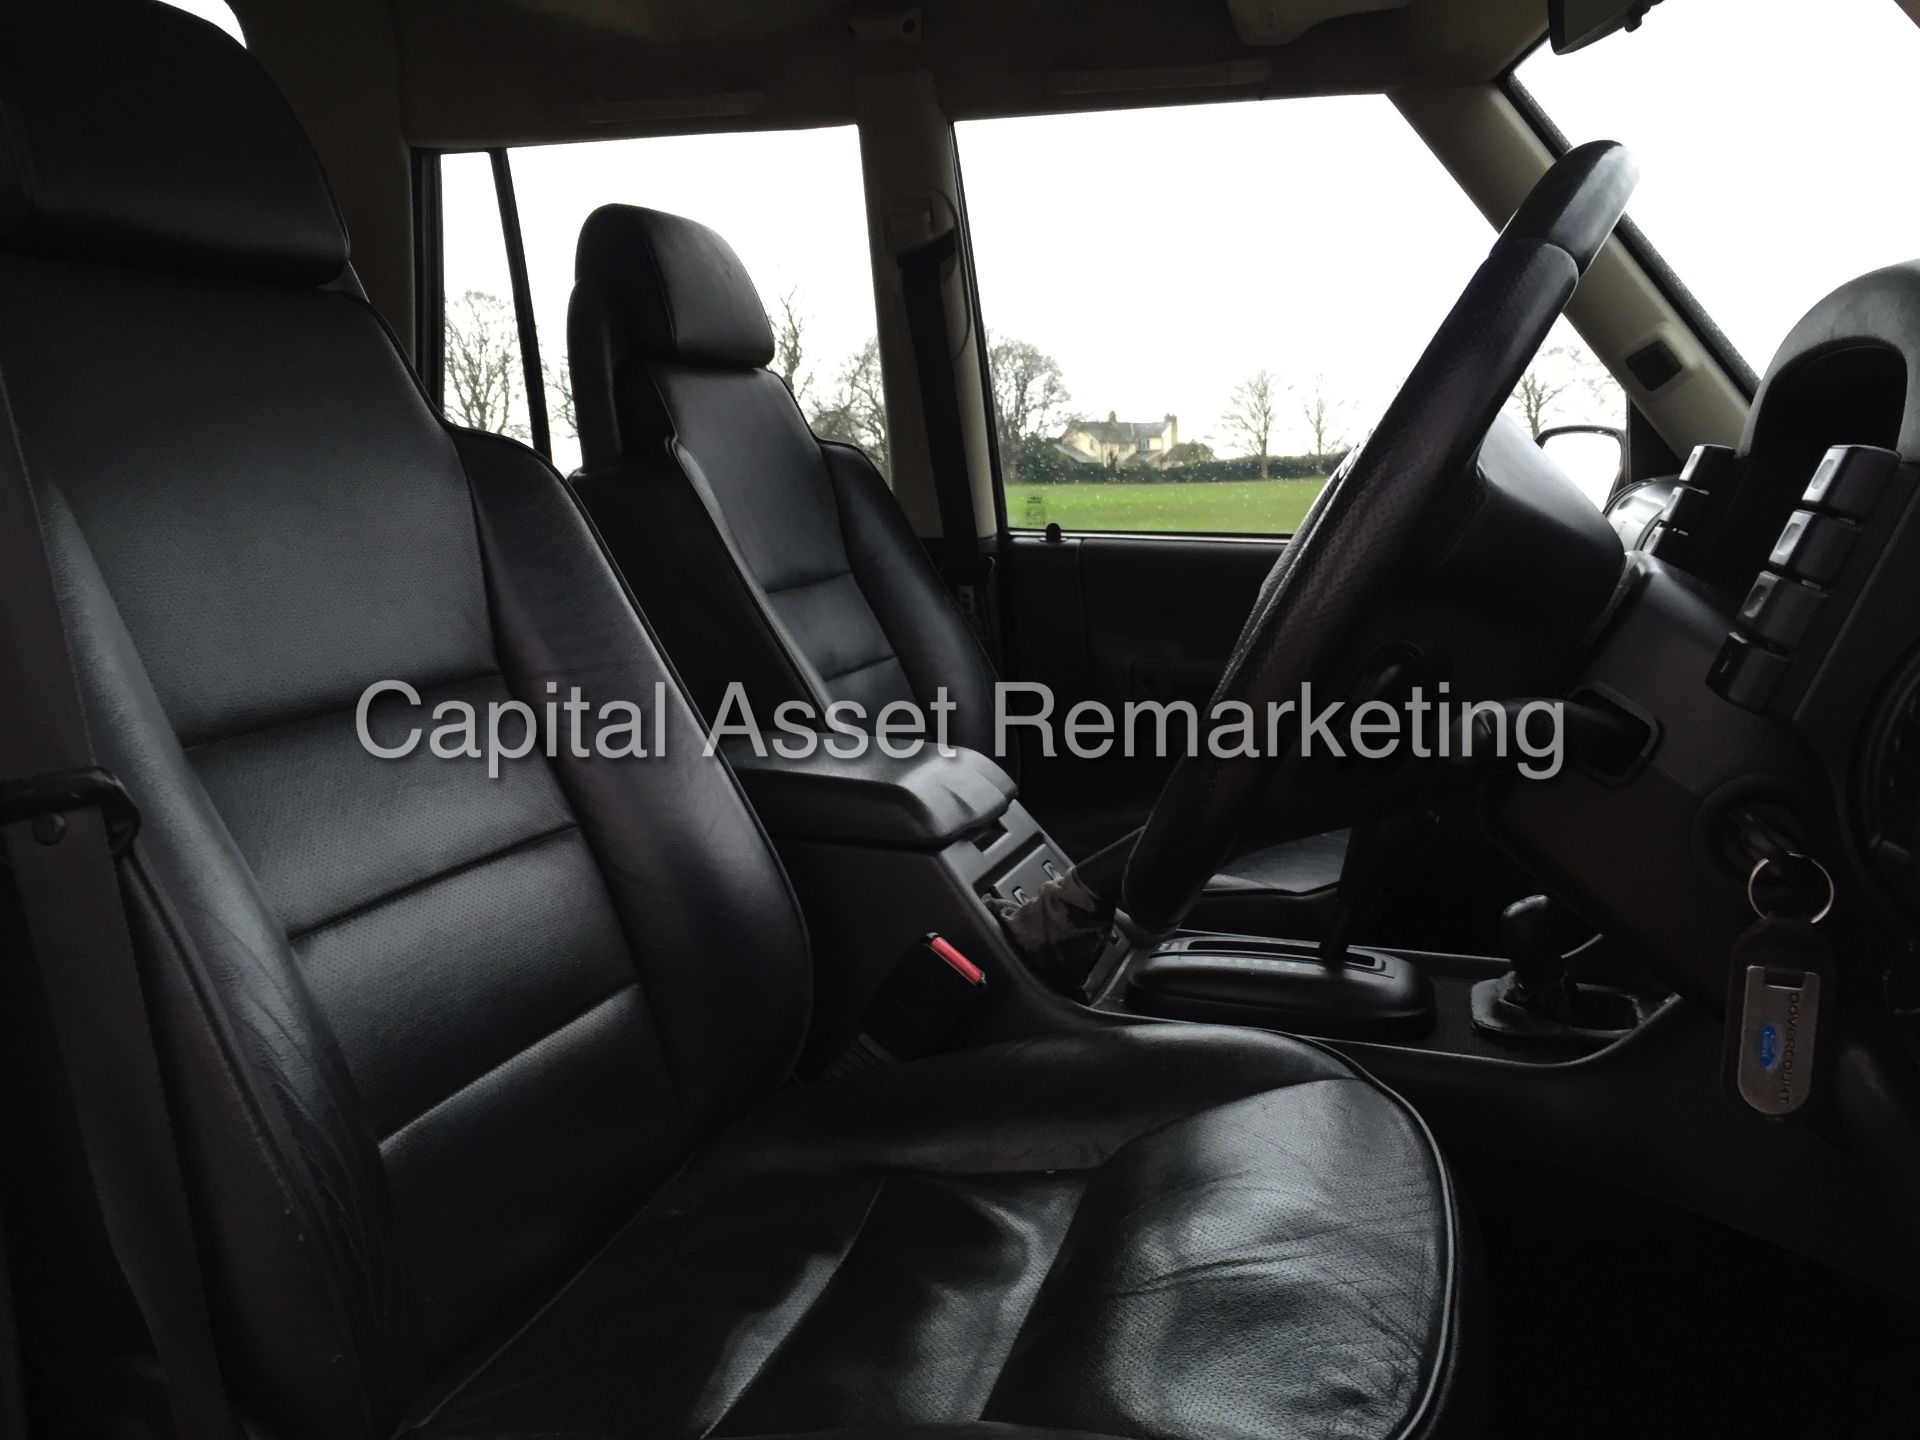 LAND ROVER DISCOVERY TD5 'LANDMARK' (2004 - 04 REG) 7 SEATER - LEATHER - AUTO (NO VAT - SAVE 20%) - Image 12 of 20